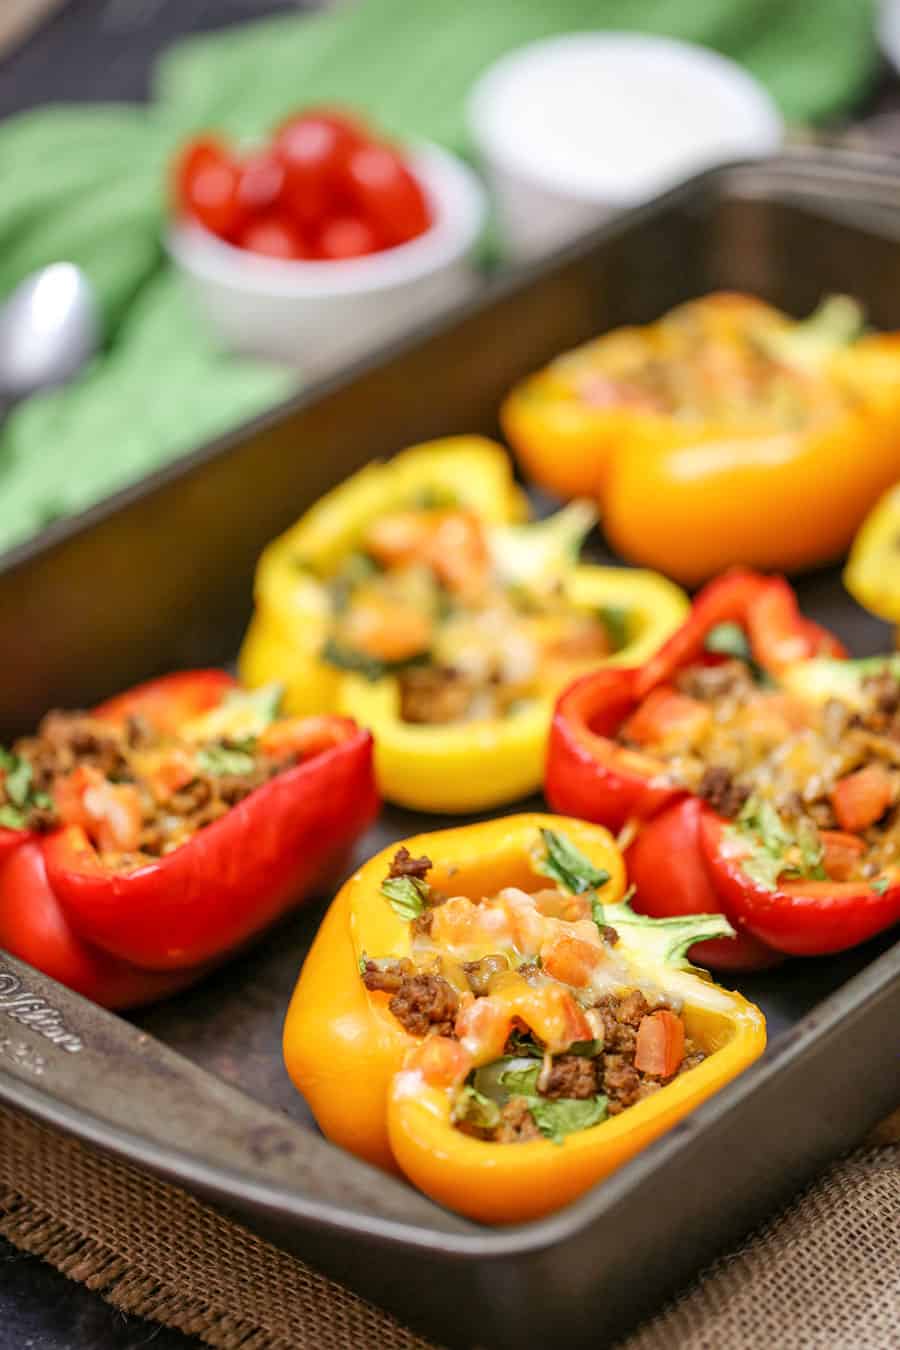 Bell Pepper Stuffed Tacos are baked with your favourite taco toppings inside, a great low-carb and low-calorie meal or appetizer option. With this no-fuss recipe, pre-cooking the bell peppers is not necessary.